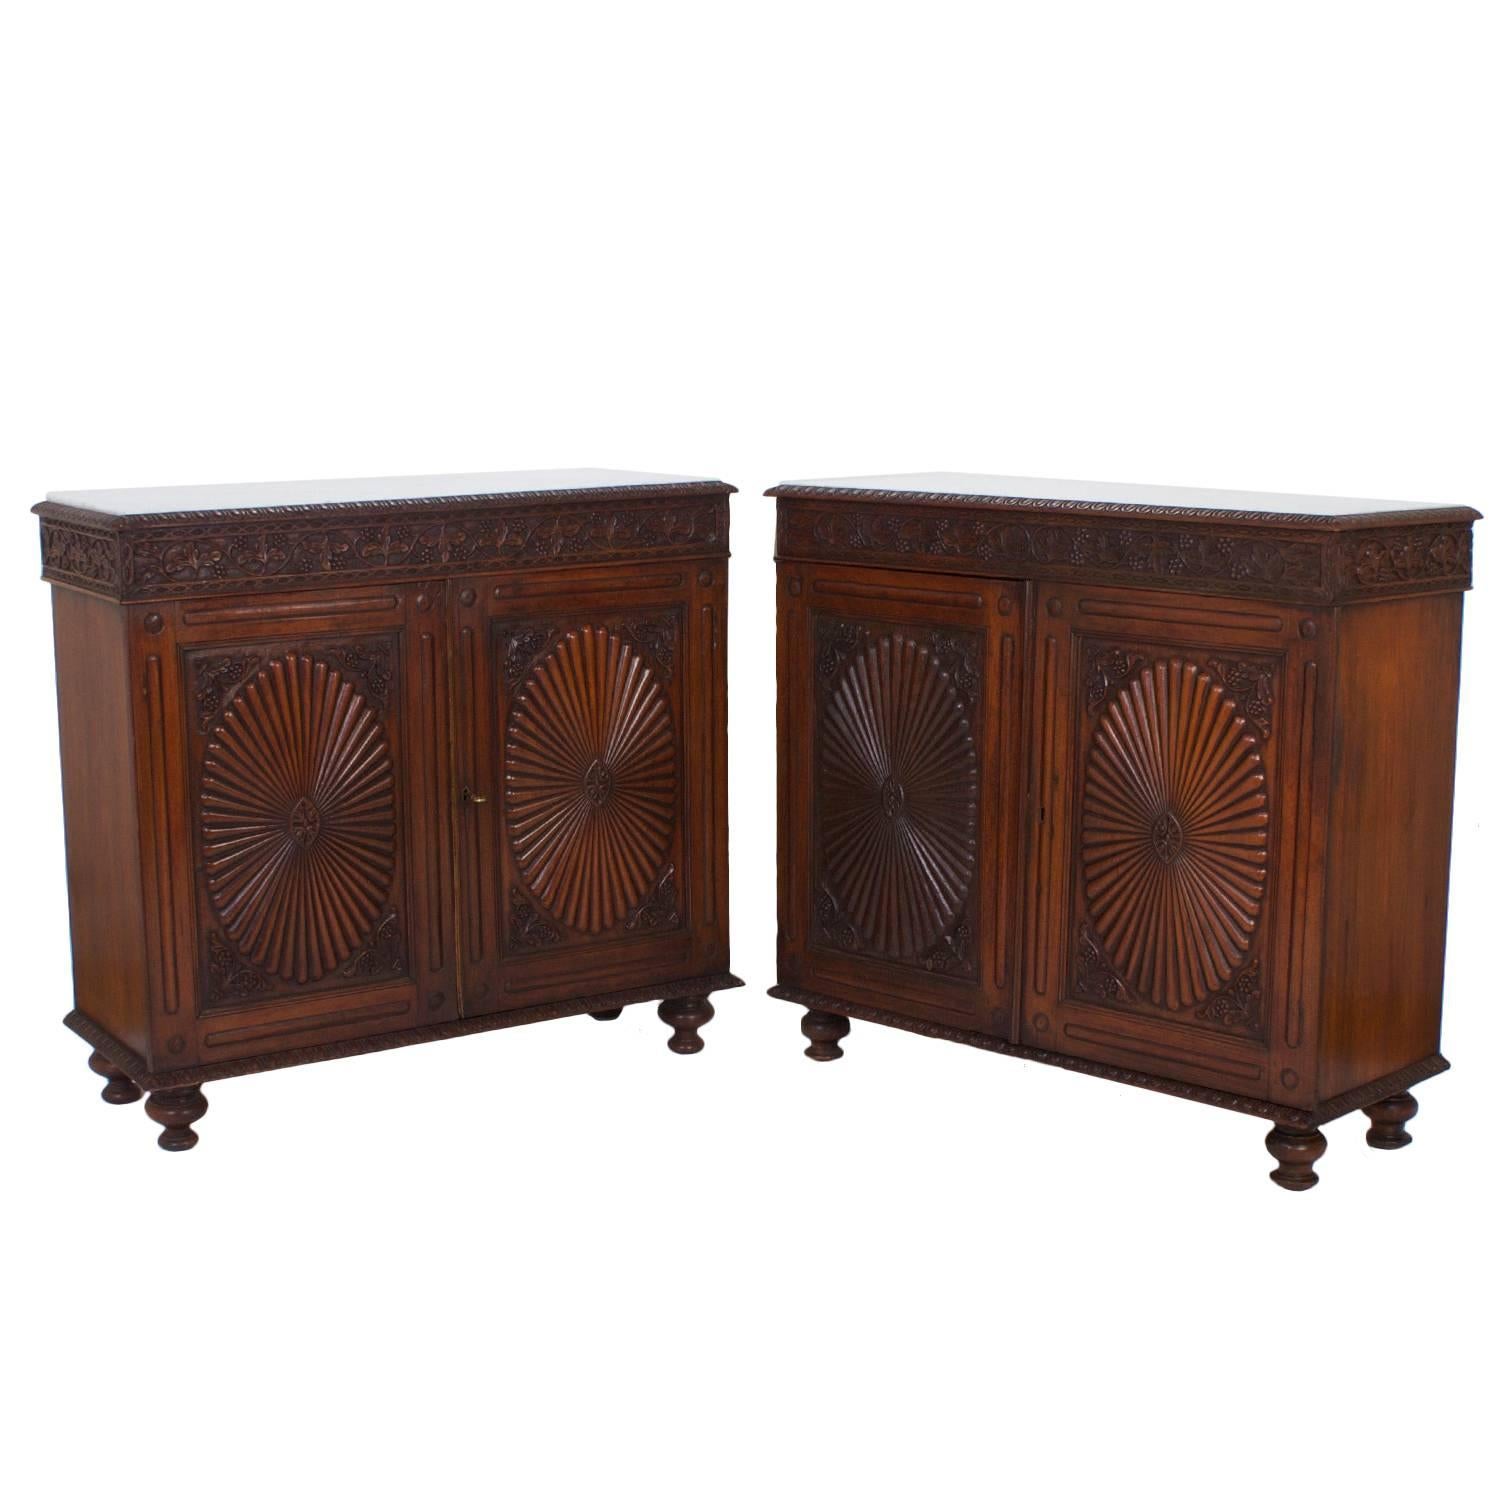 Pair of Antique Anglo Indian Marble-Top Sideboards or Cabinets